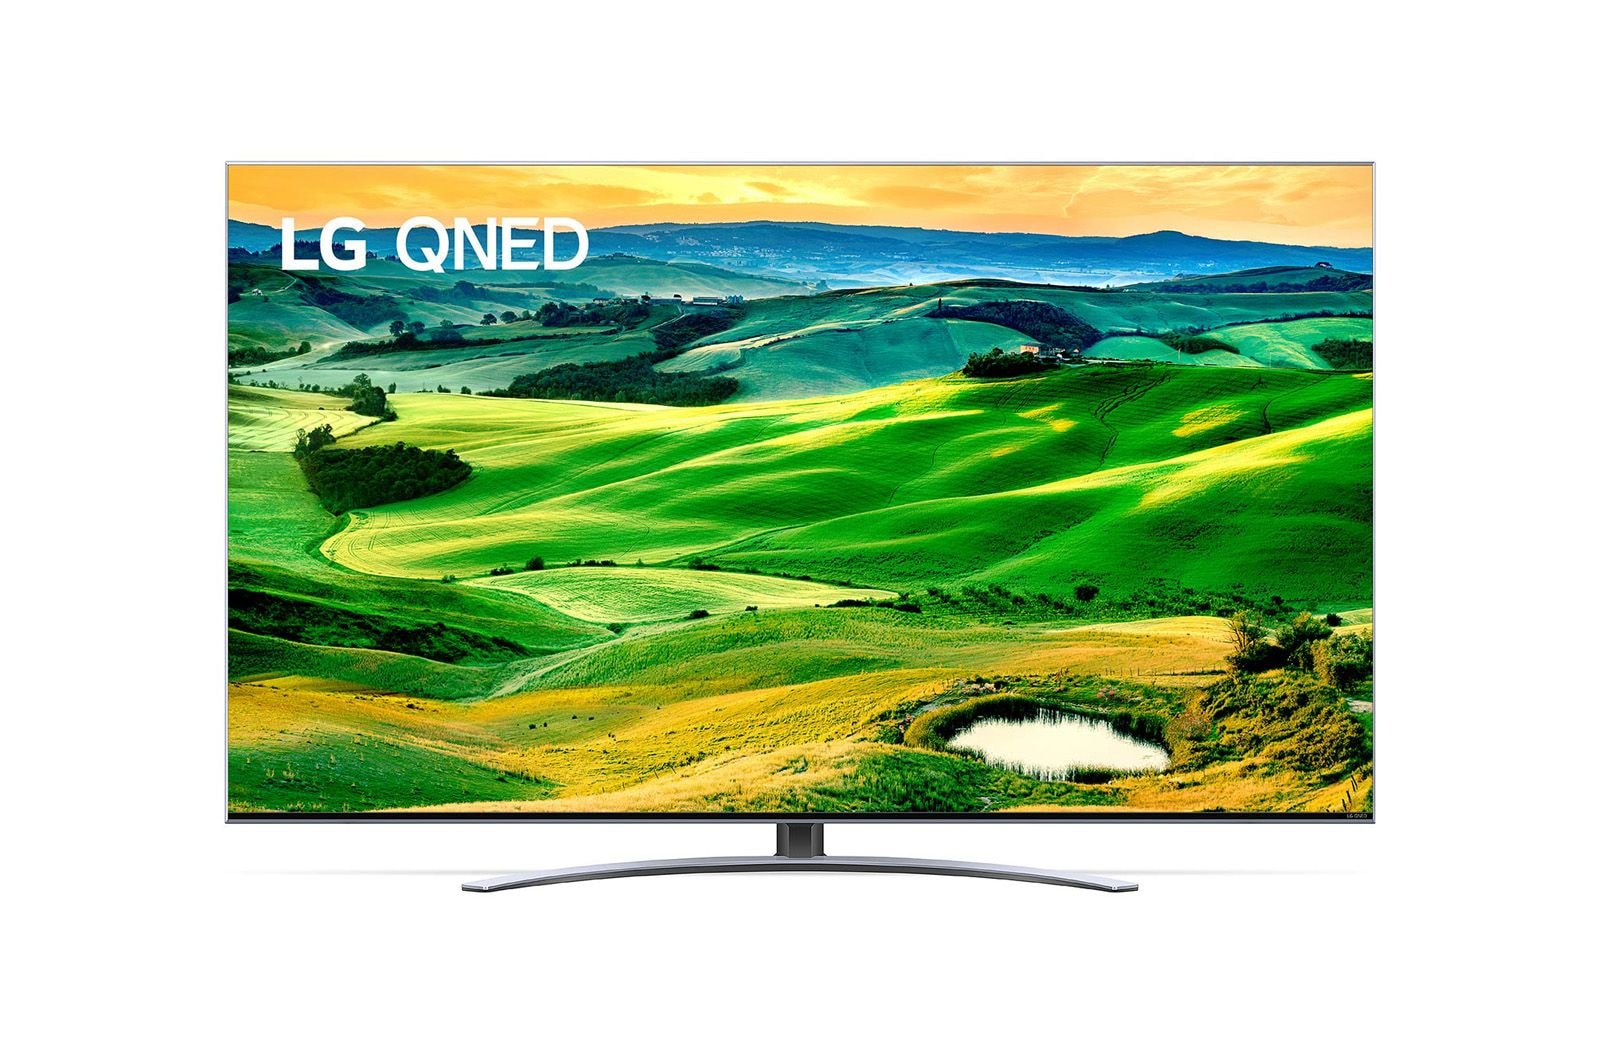 LG QNED | TV 75'' Serie QNED82 | QNED 4K, Smart TV, HDR10 Pro, HDMI 2.1 VRR, 75QNED826QB